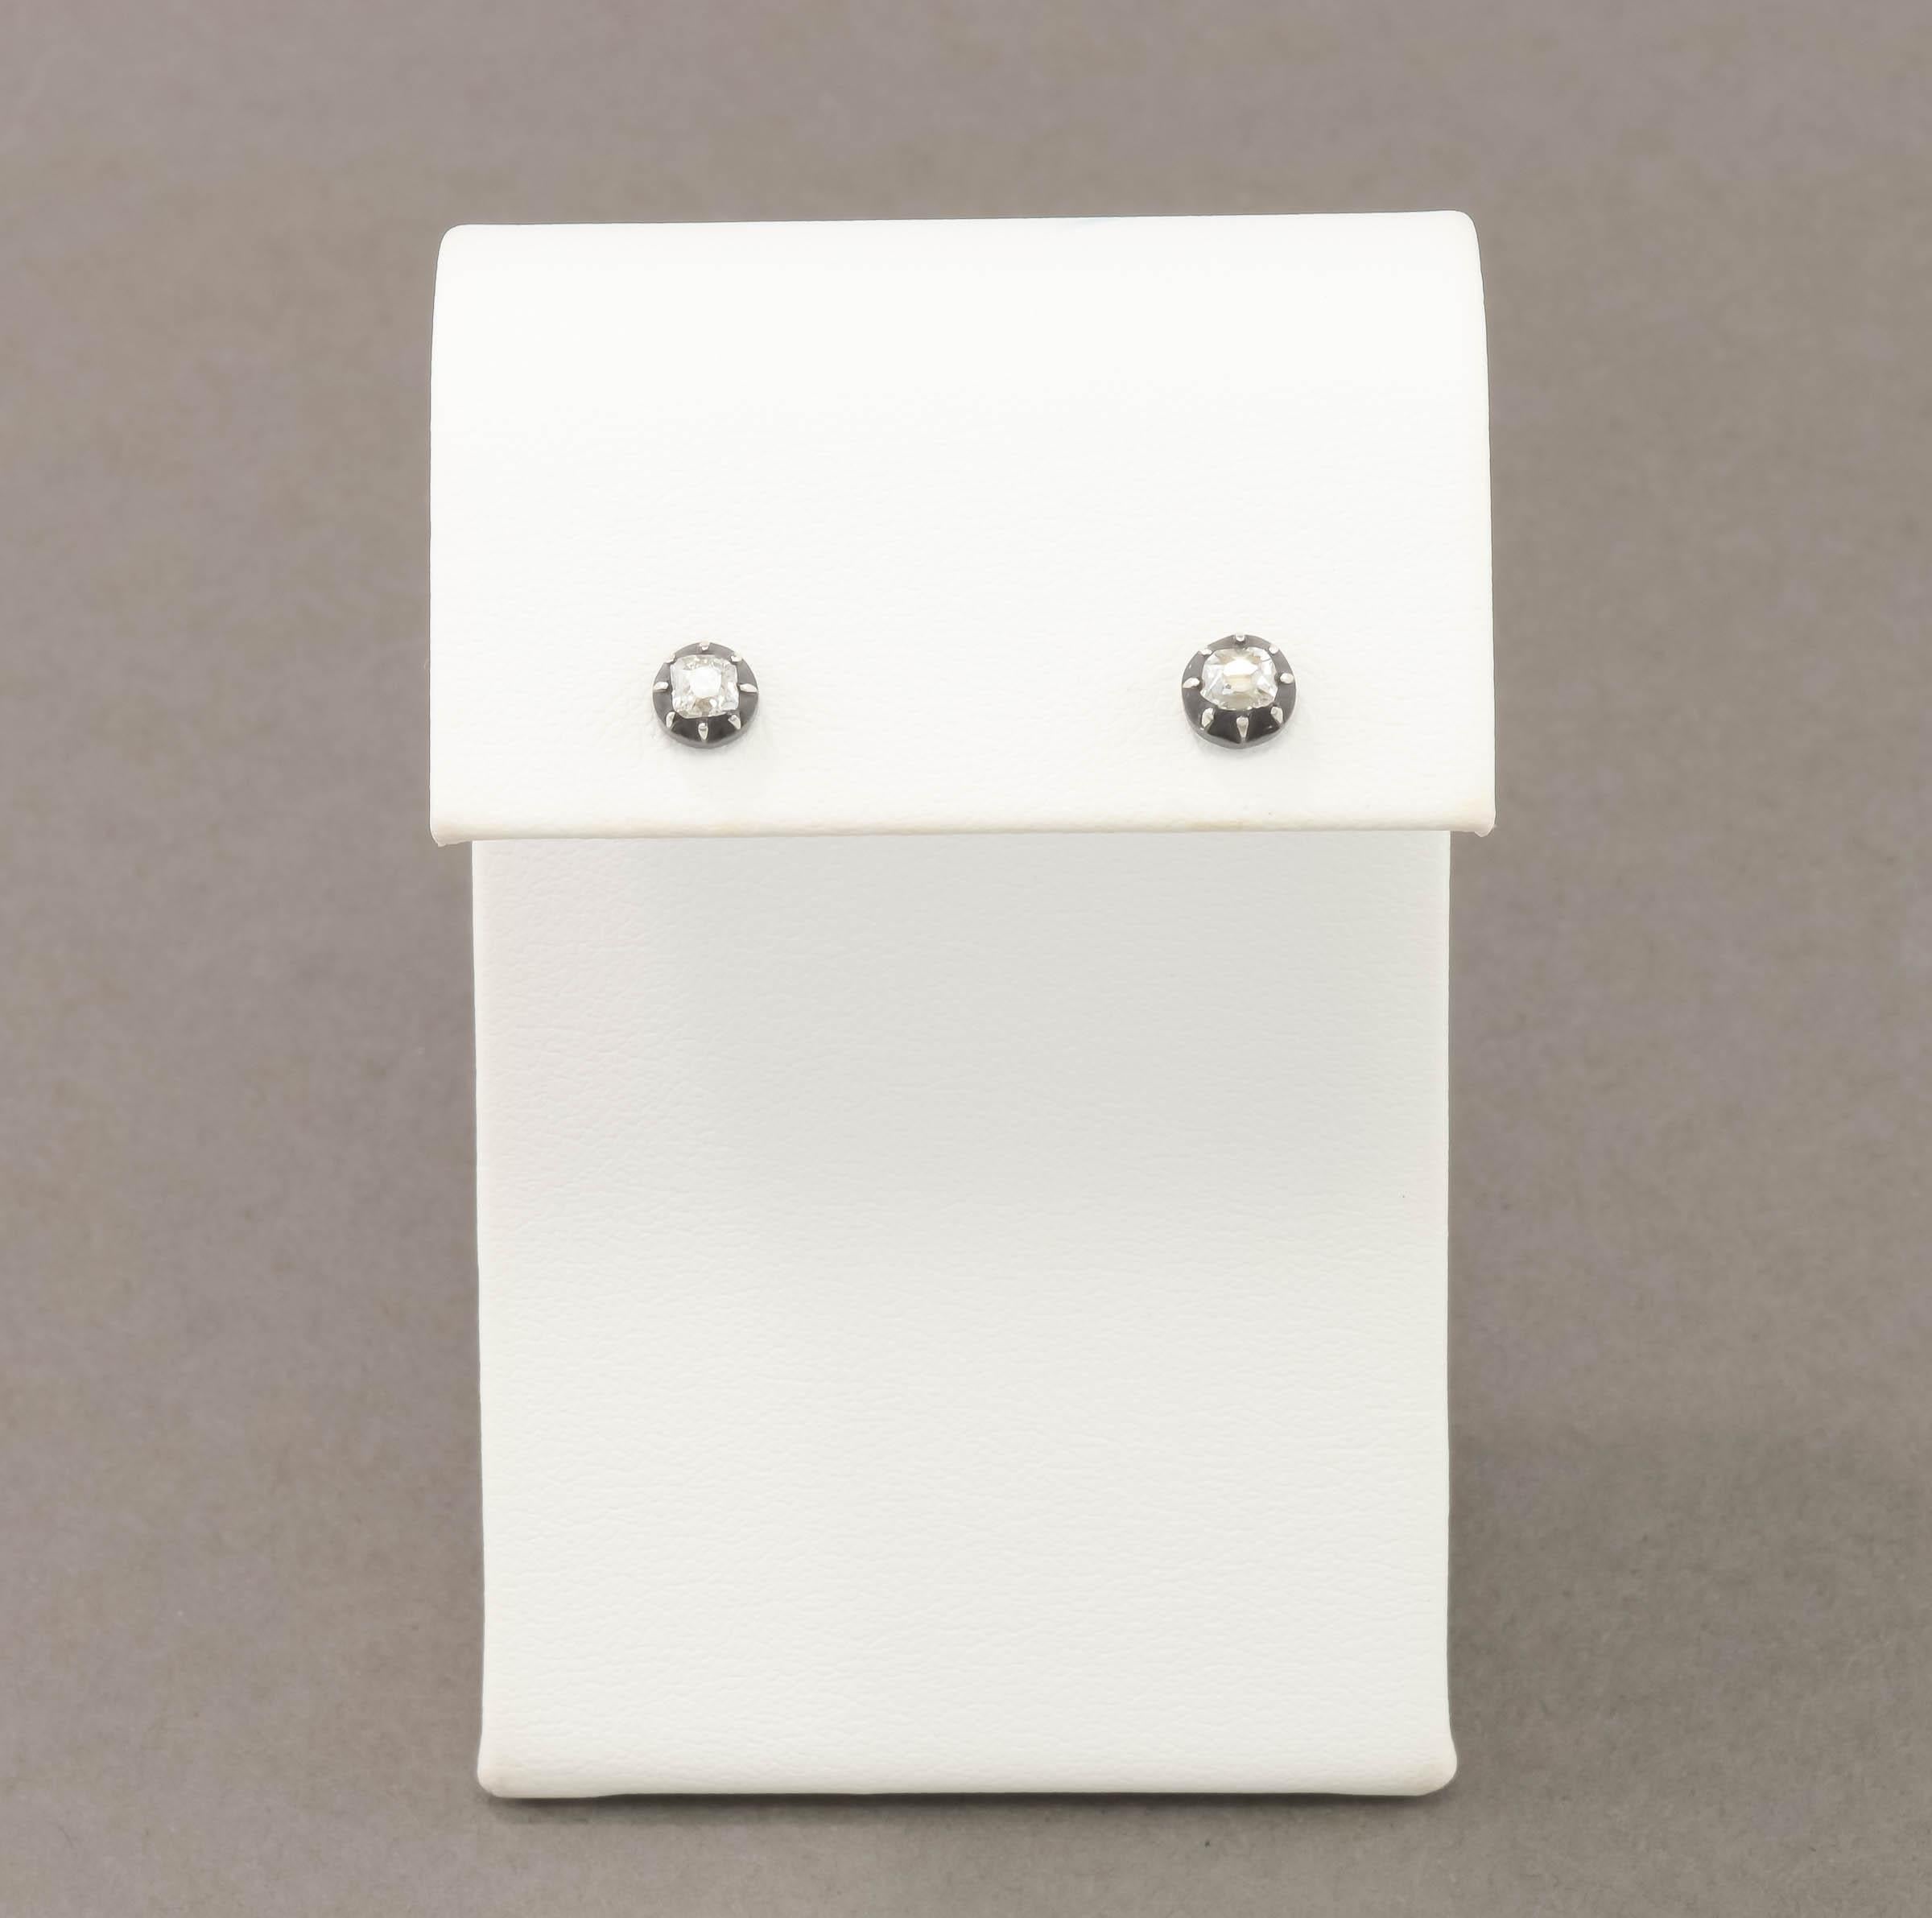 Offered is a one-of-a-kind pair of diamond stud earrings made with Georgian period old mine cut diamonds in their original old 